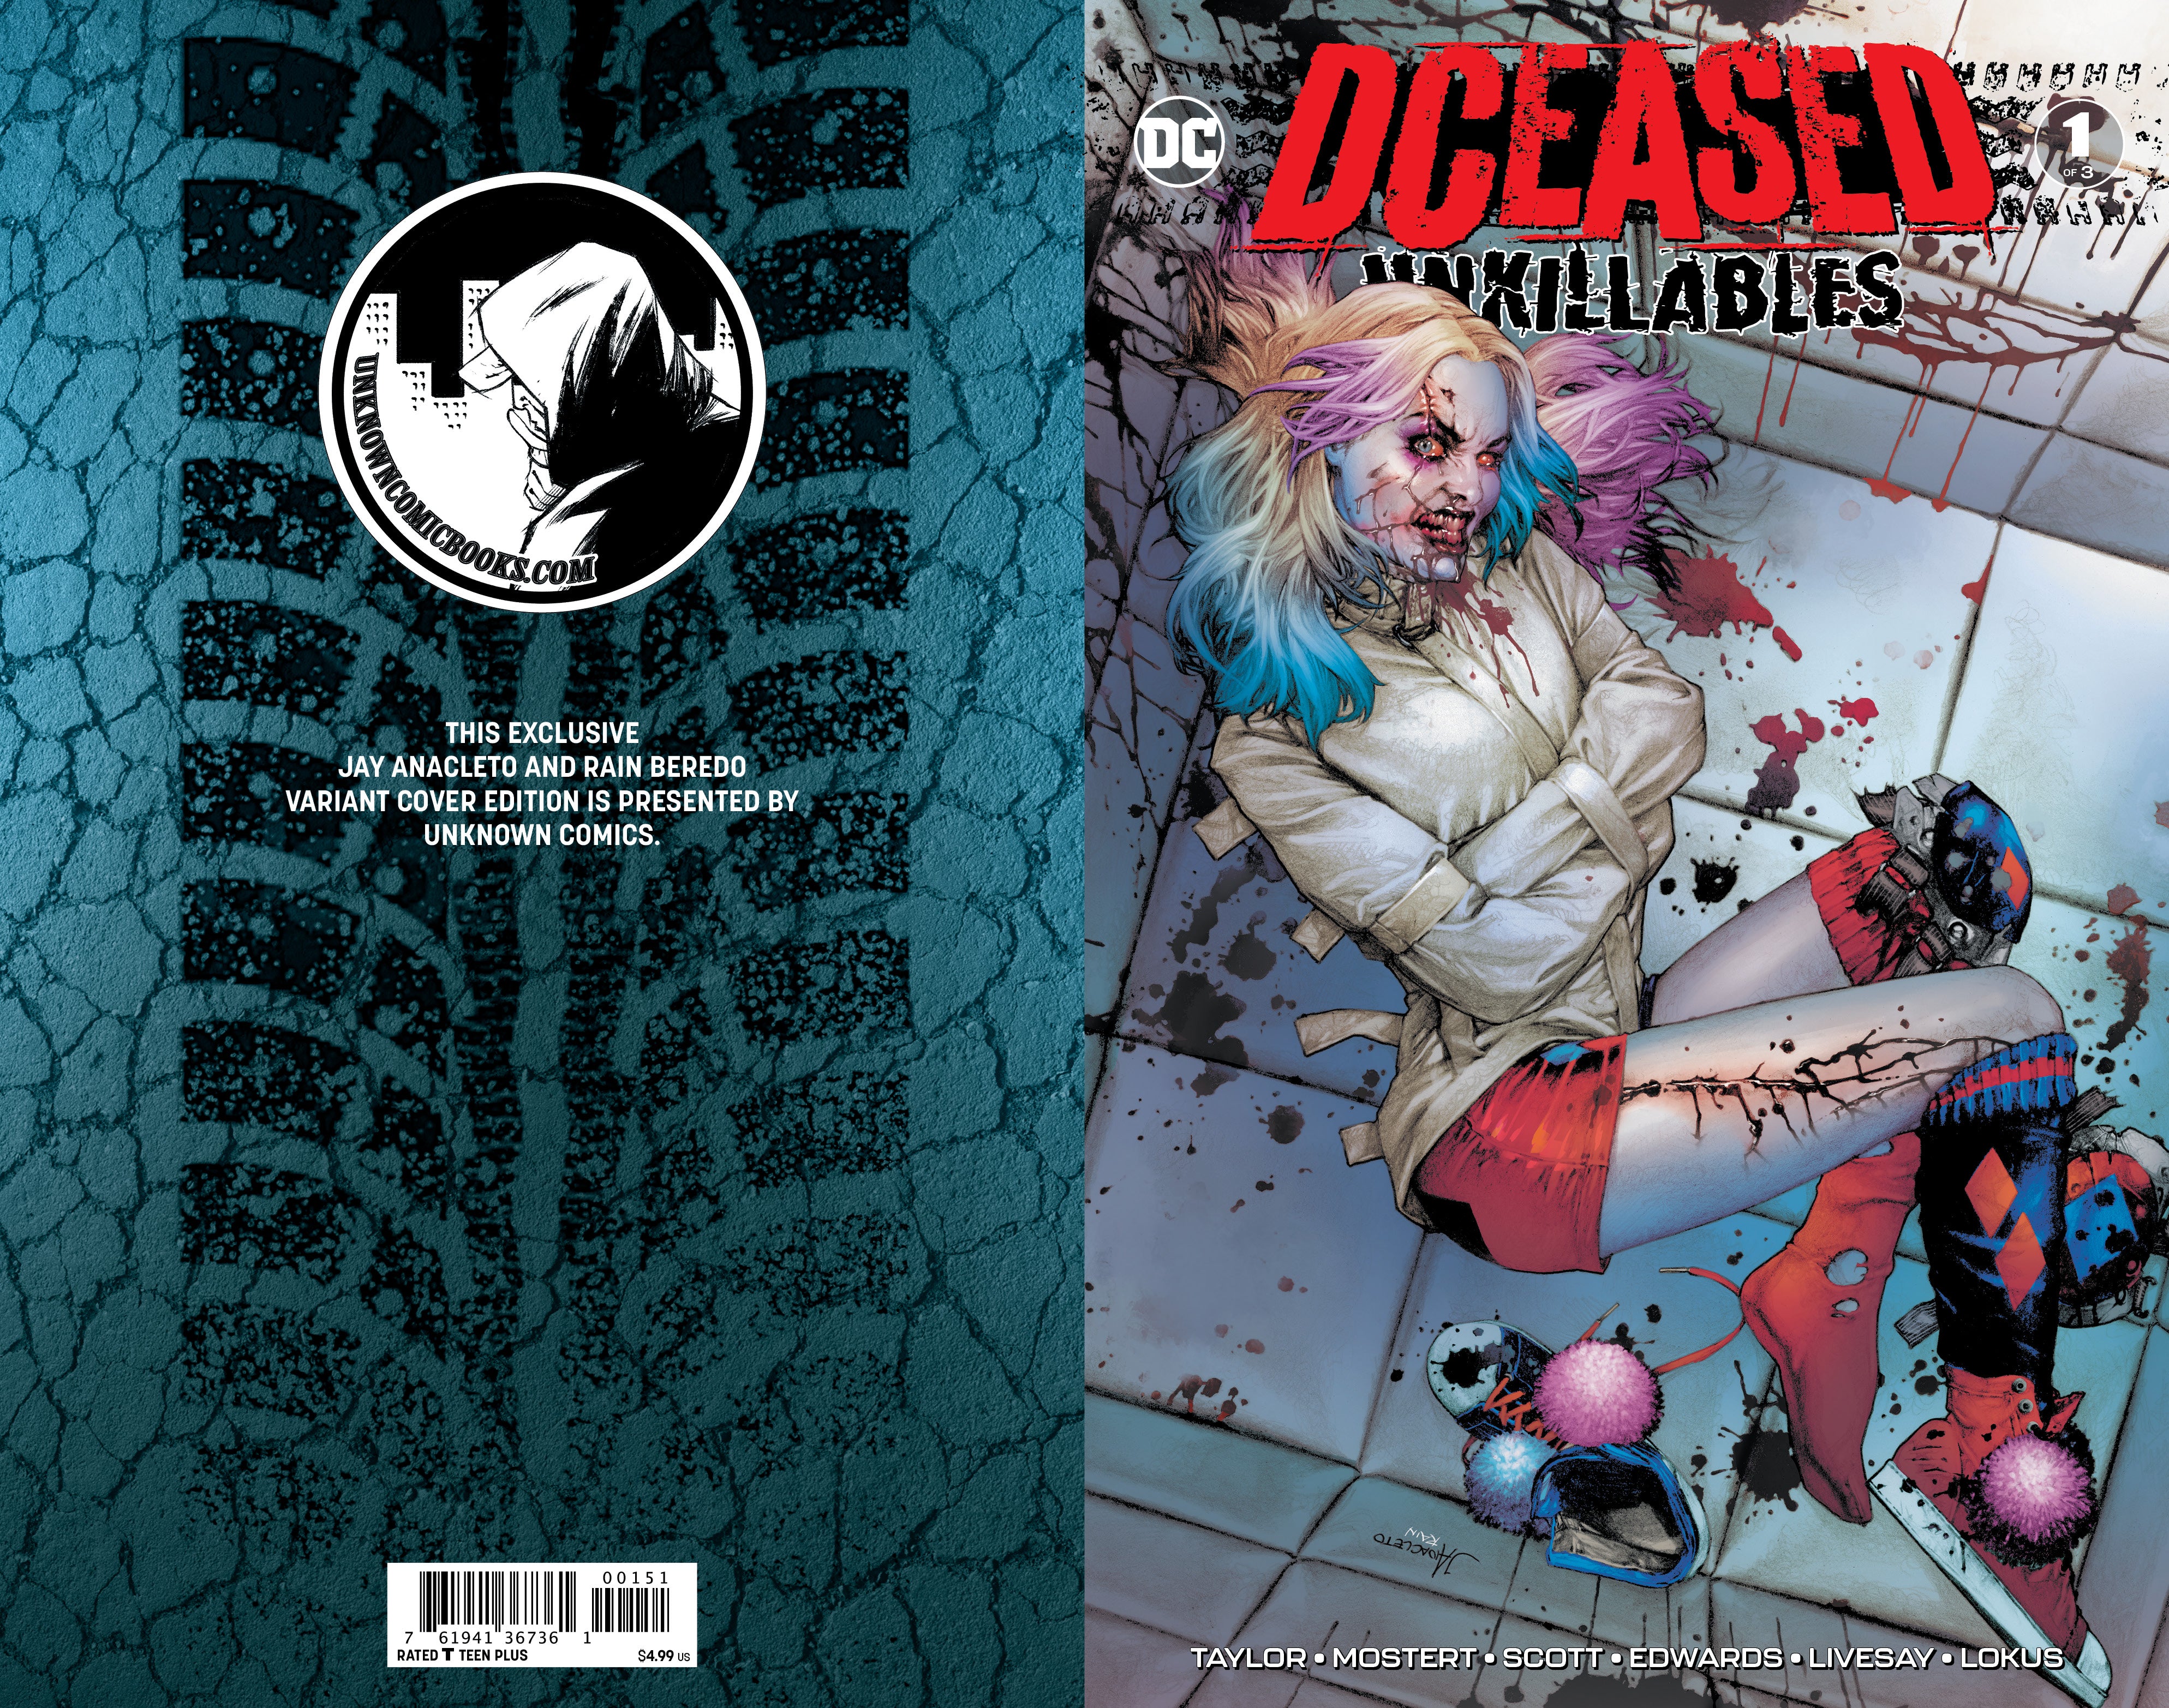 DCEASED UNKILLABLES #1 (OF 3) UNKNOWN COMICS JAY ANACLETO EXCLUSIVE VAR (02/19/2020)